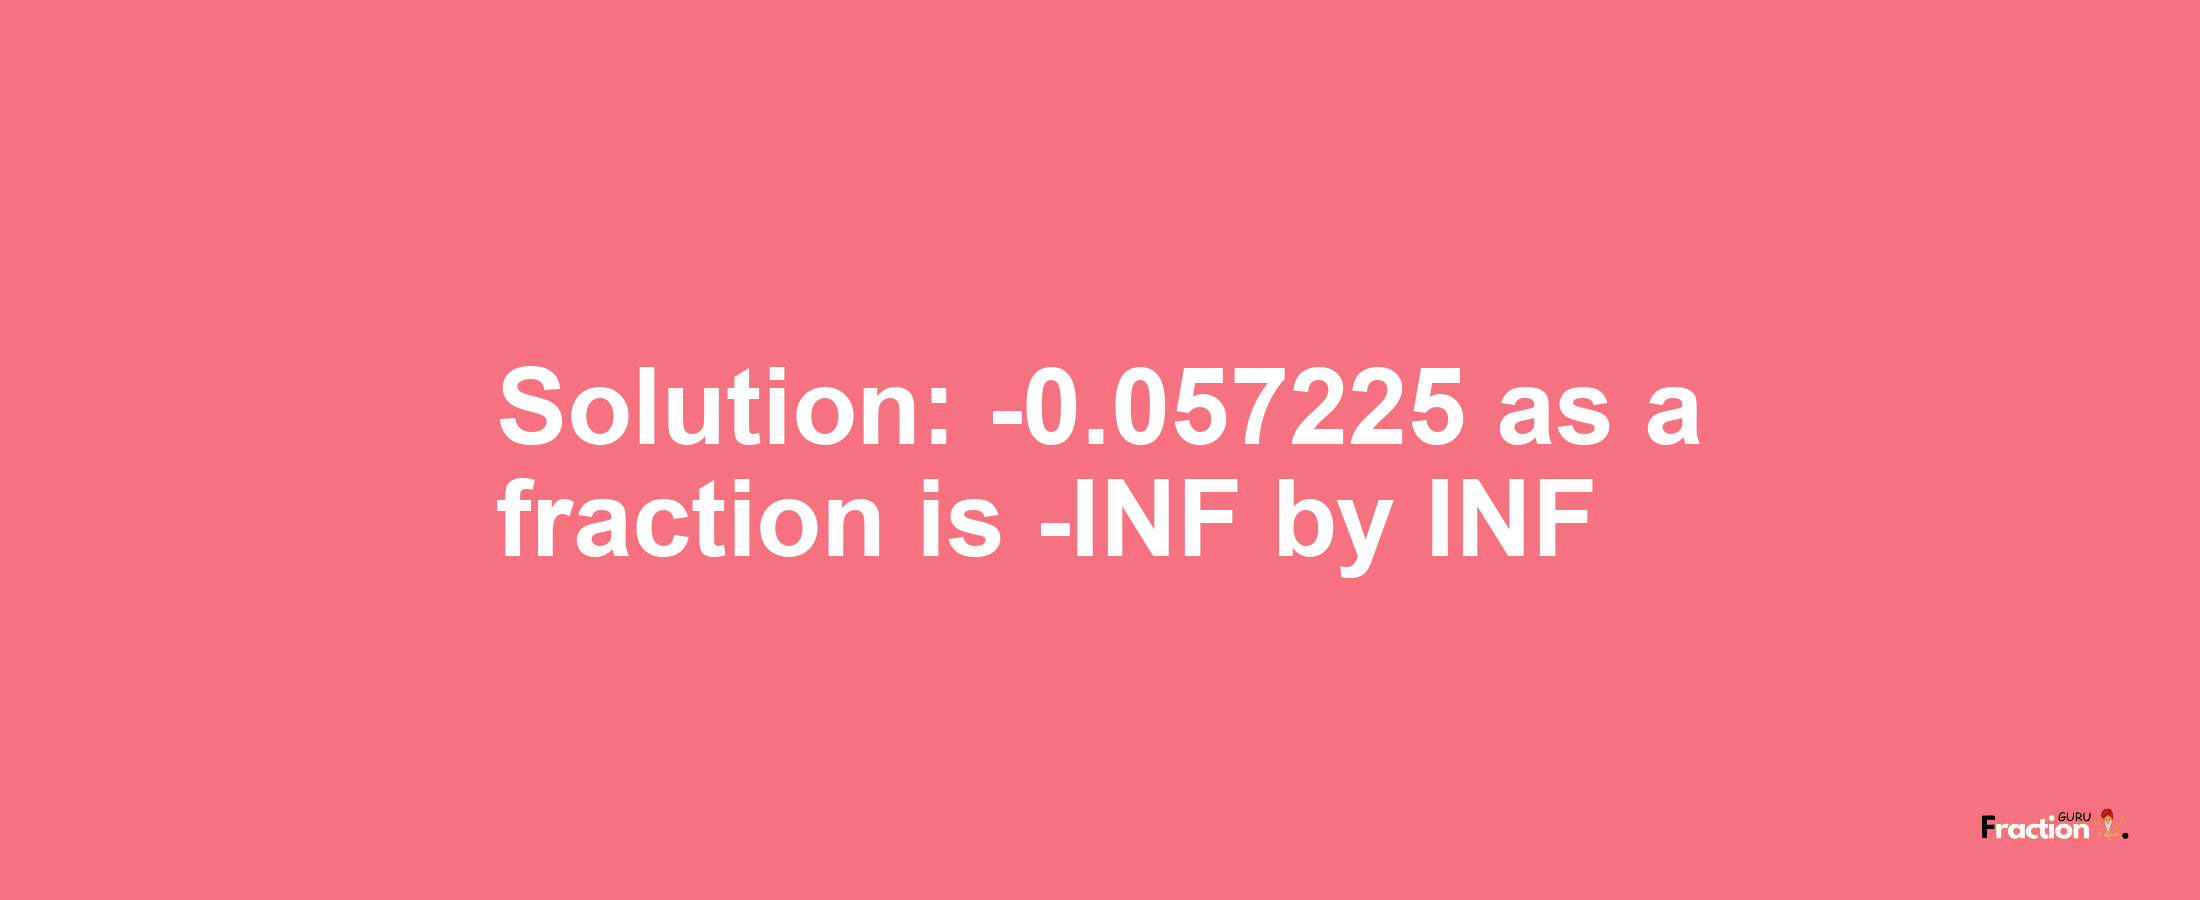 Solution:-0.057225 as a fraction is -INF/INF